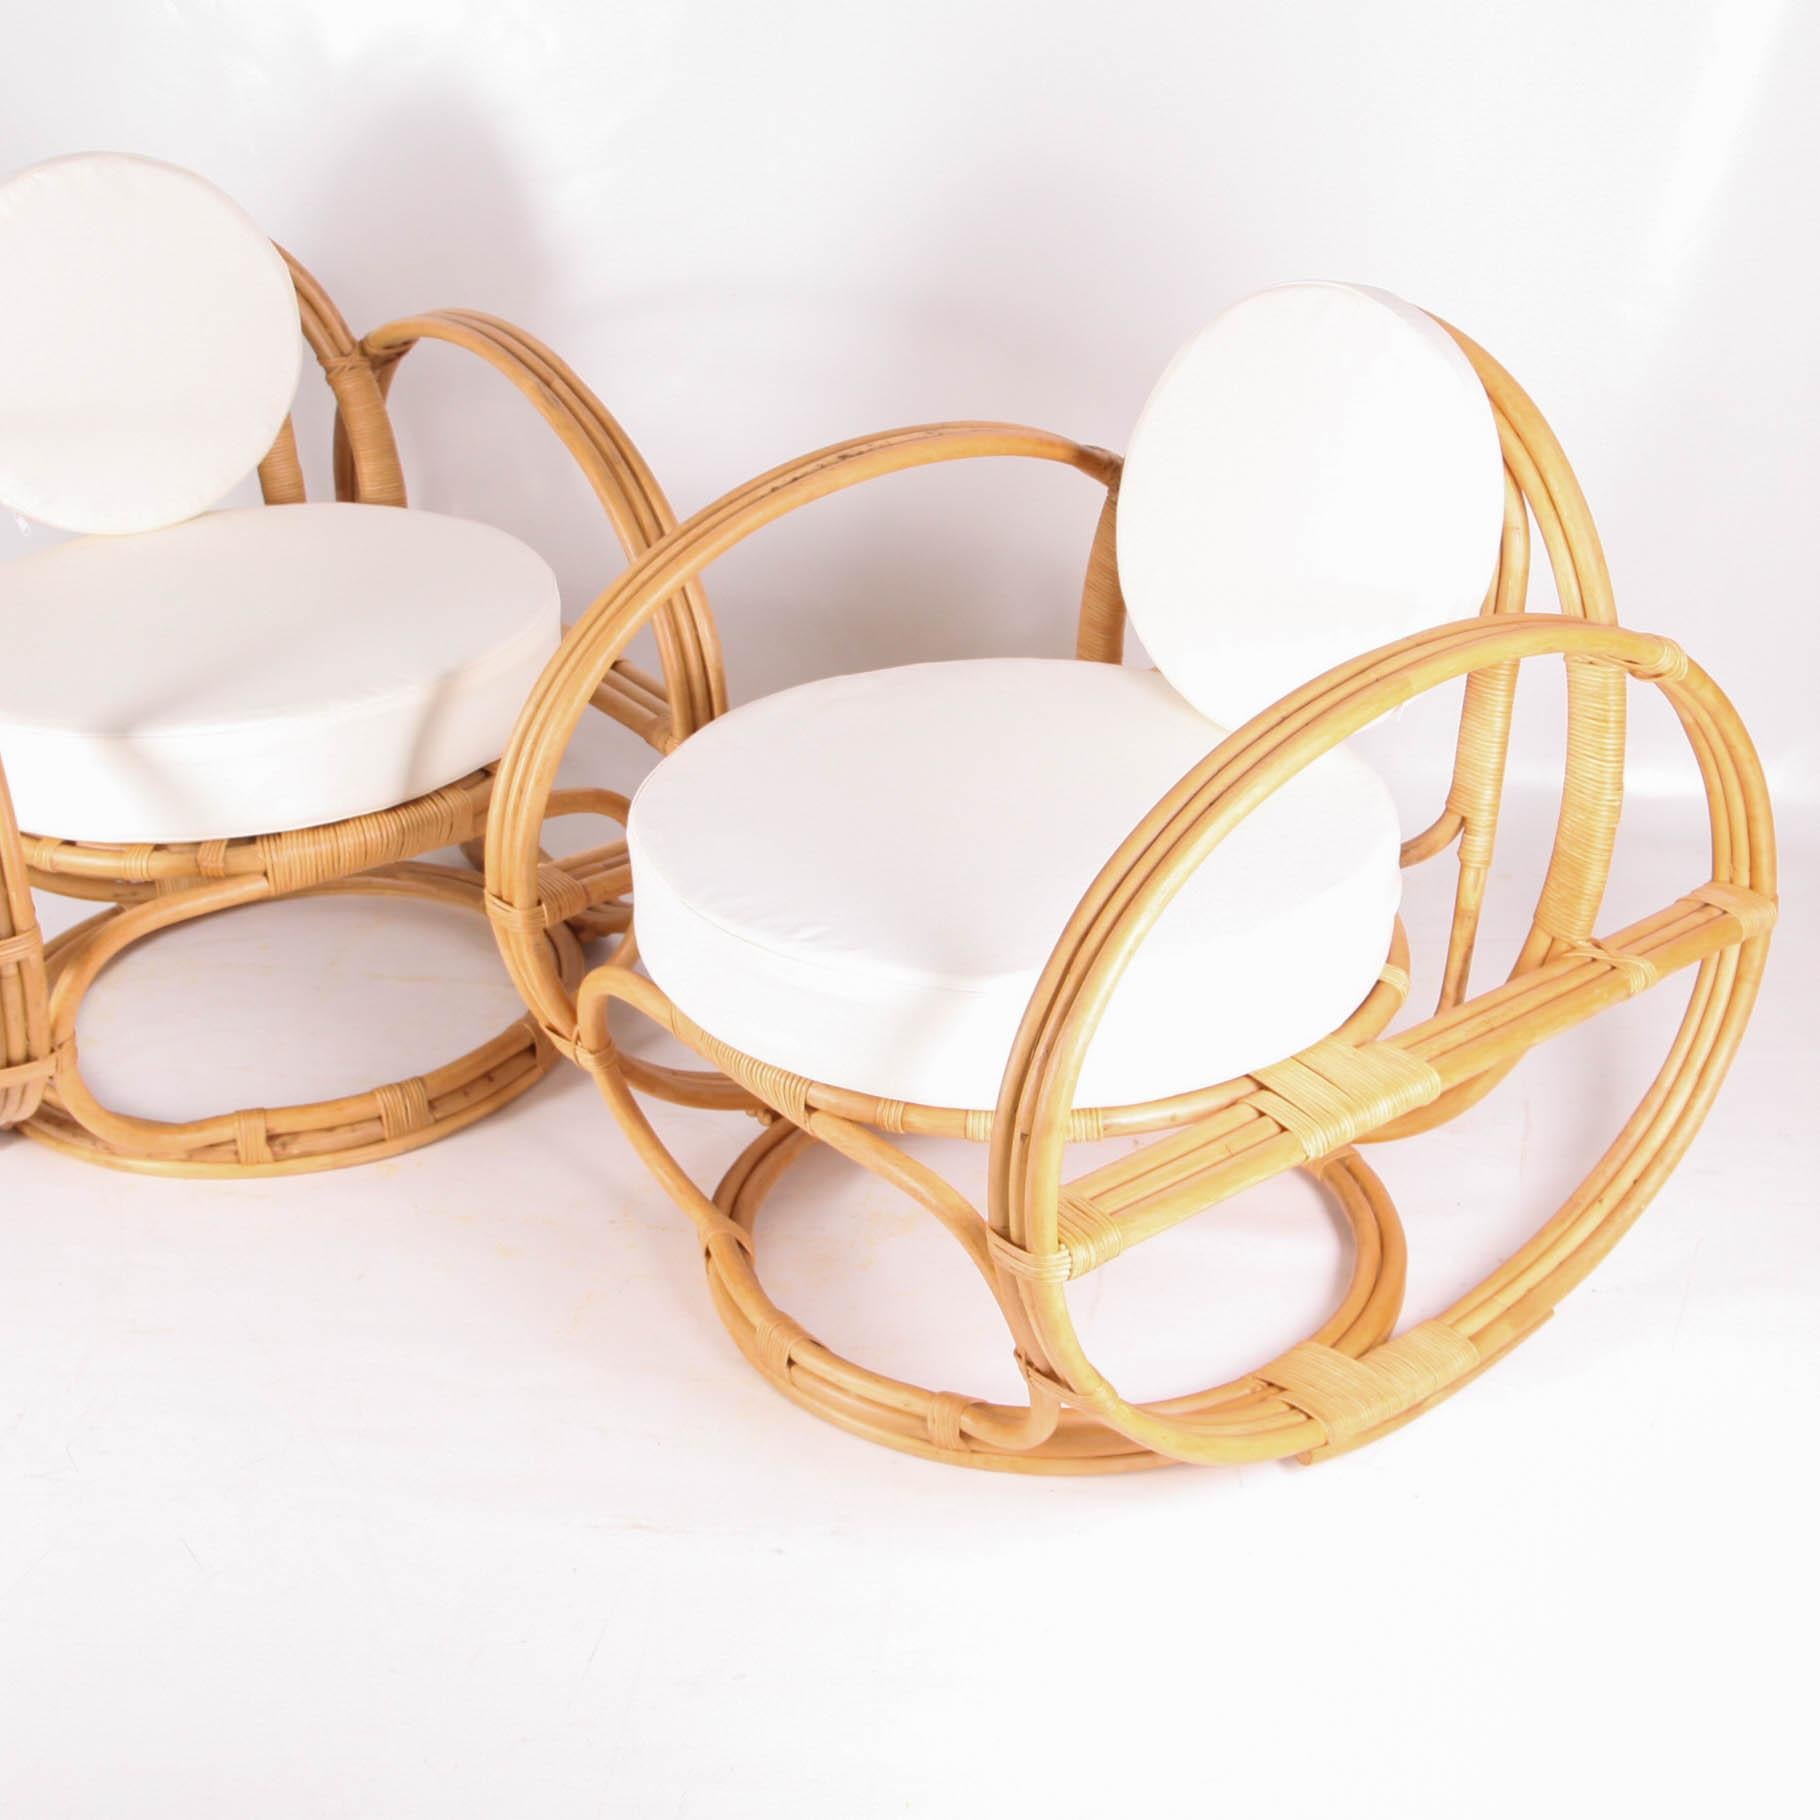 Beautiful elegant pair of rattan « hoops » armchairs. They are large, comfortable and high quality made. Entirely hand made, they are in excellent condition.